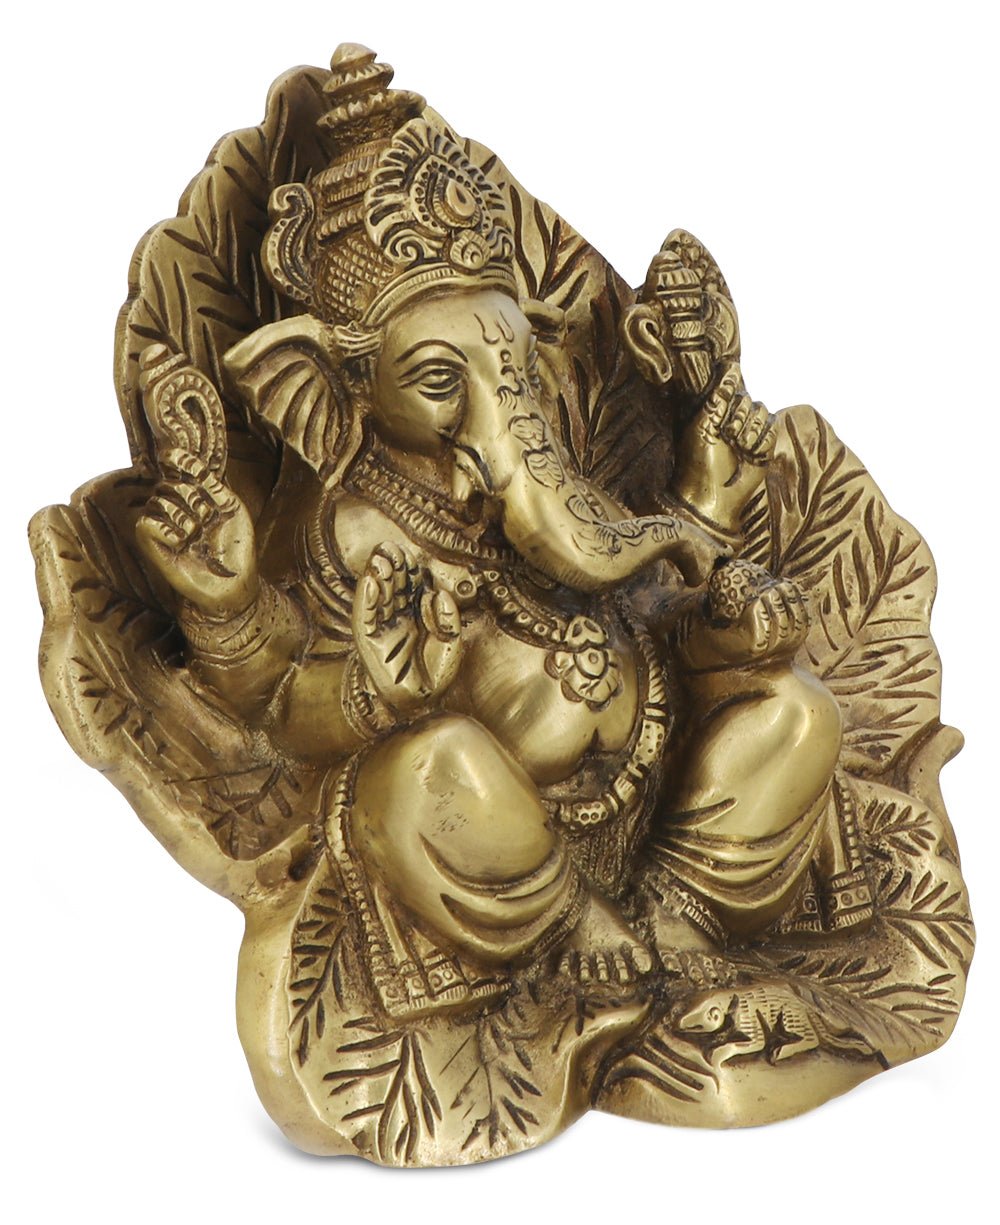 Ganesh Statue on Leaf Throne - Sculptures & Statues